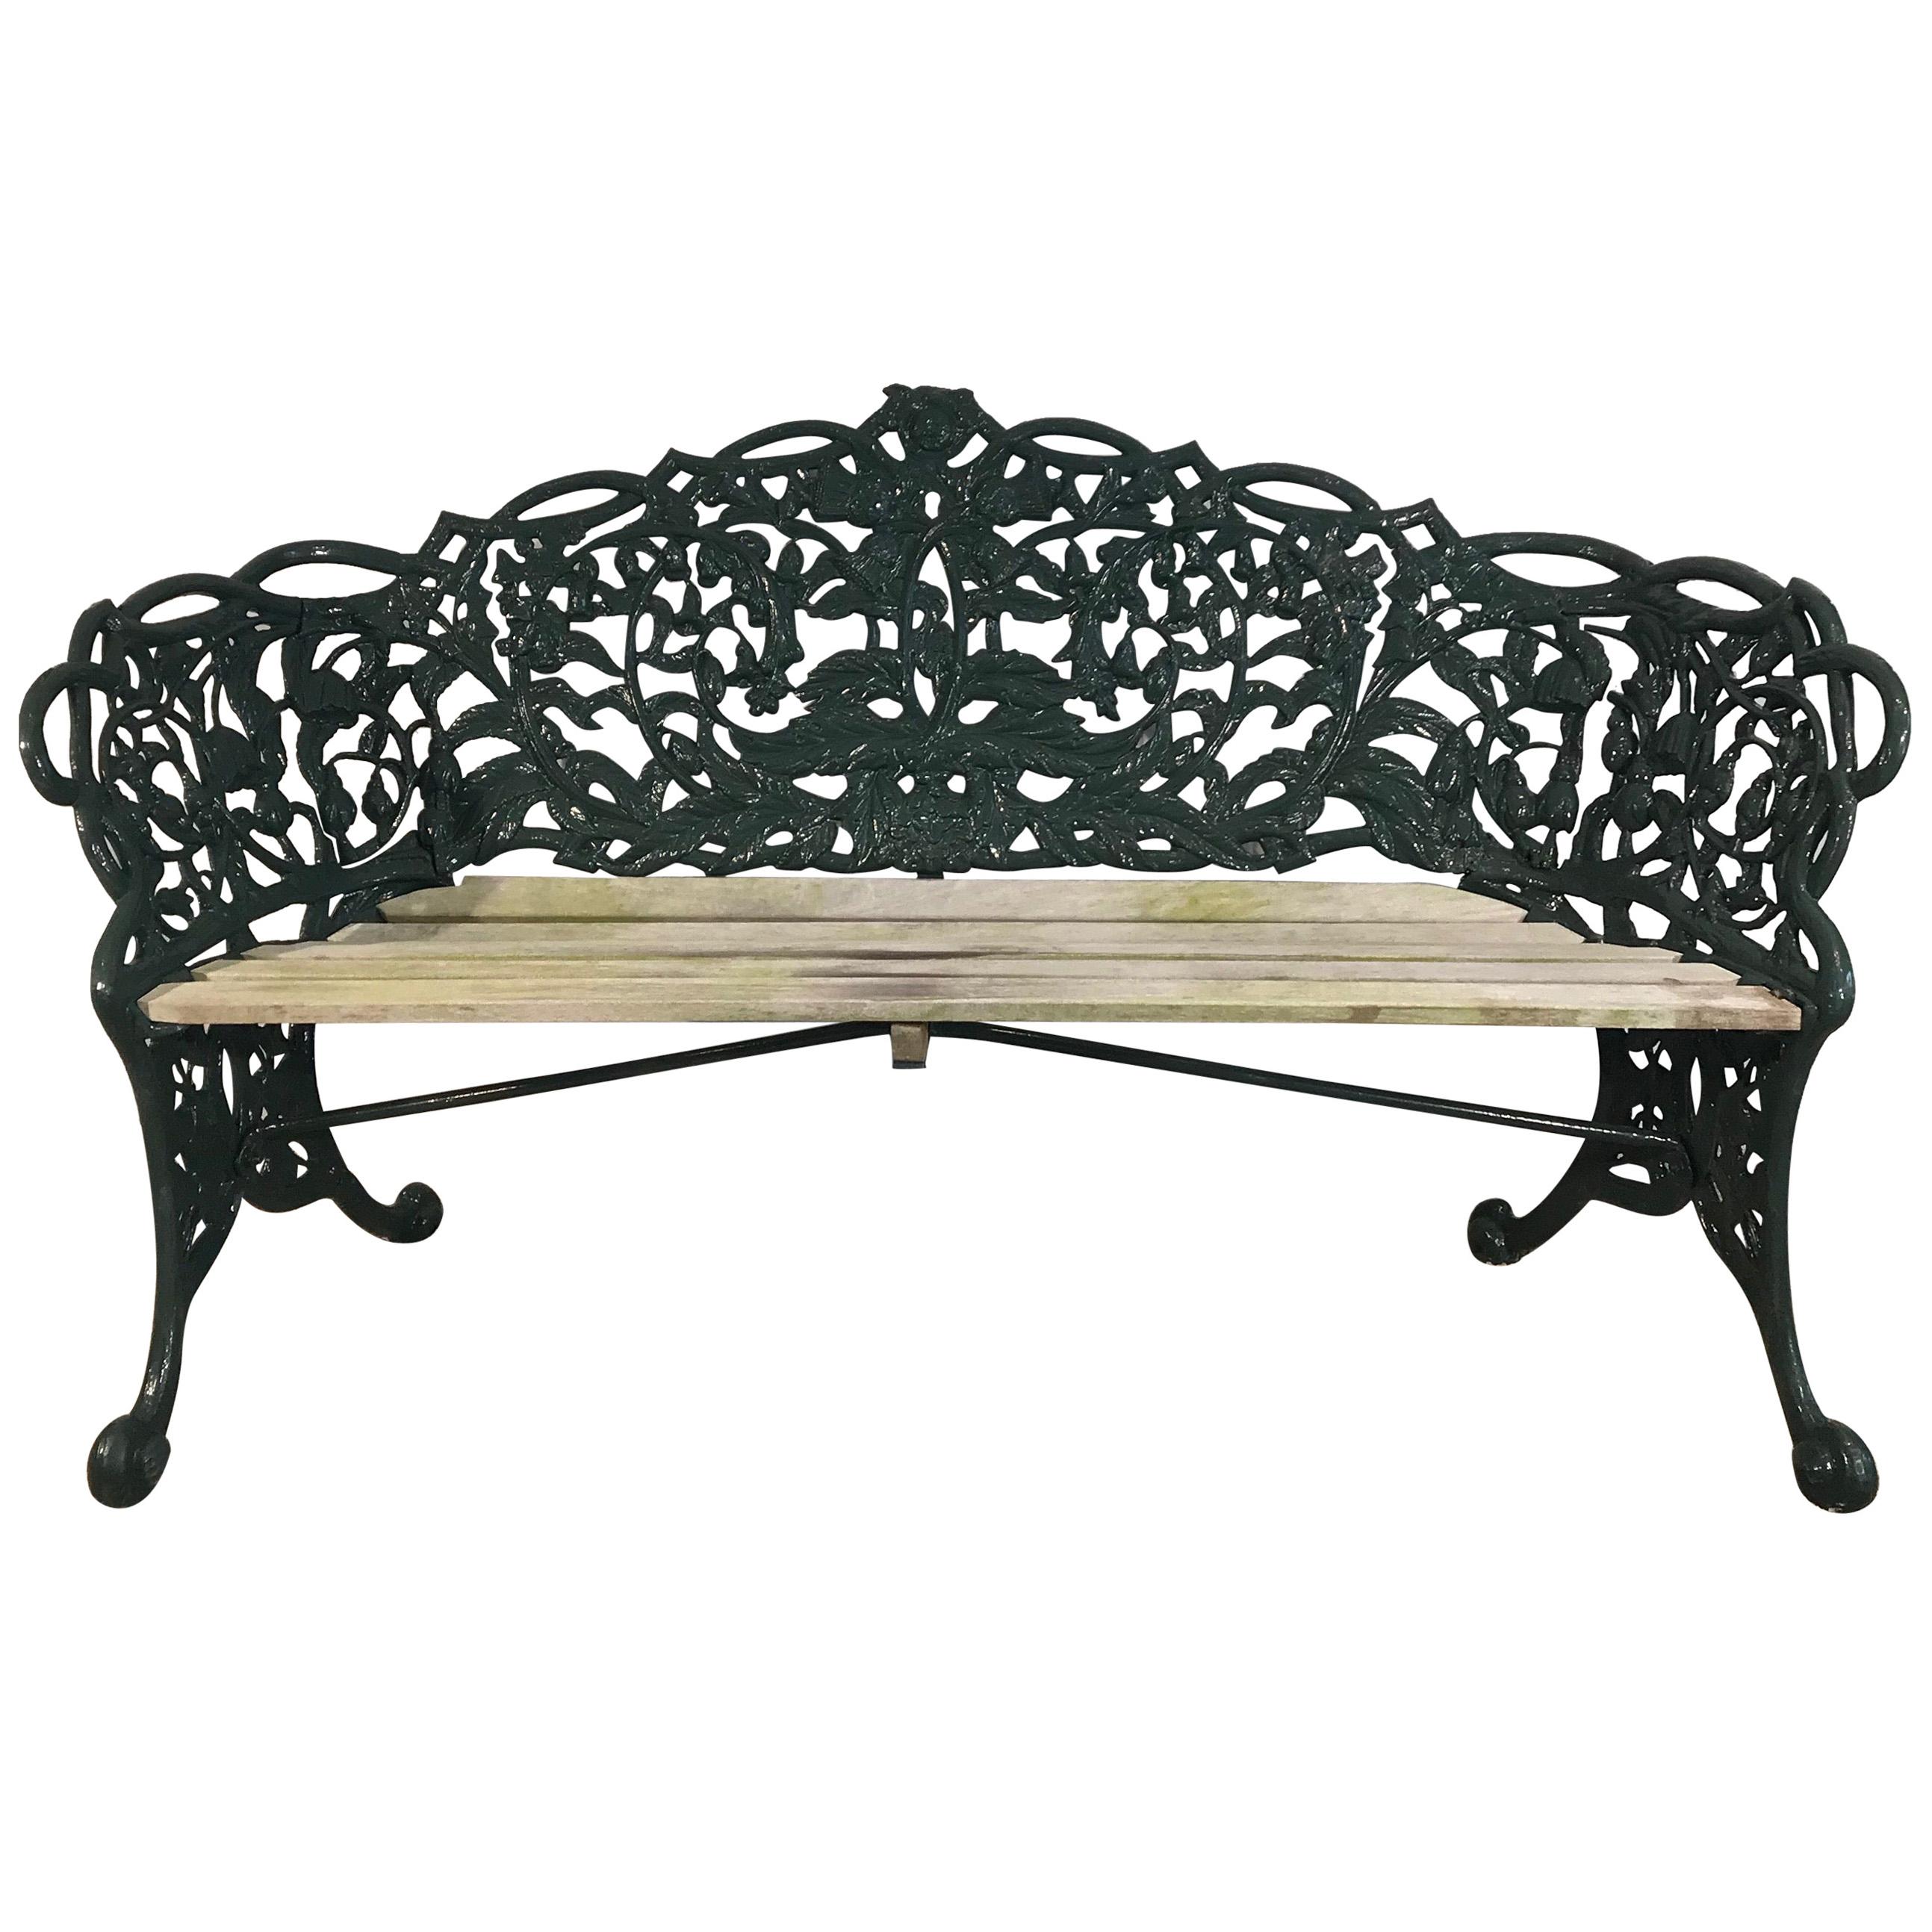 Rose and Thistle Cast Iron Bench by T. Perry and Sons, Glasgow, 1858 For Sale